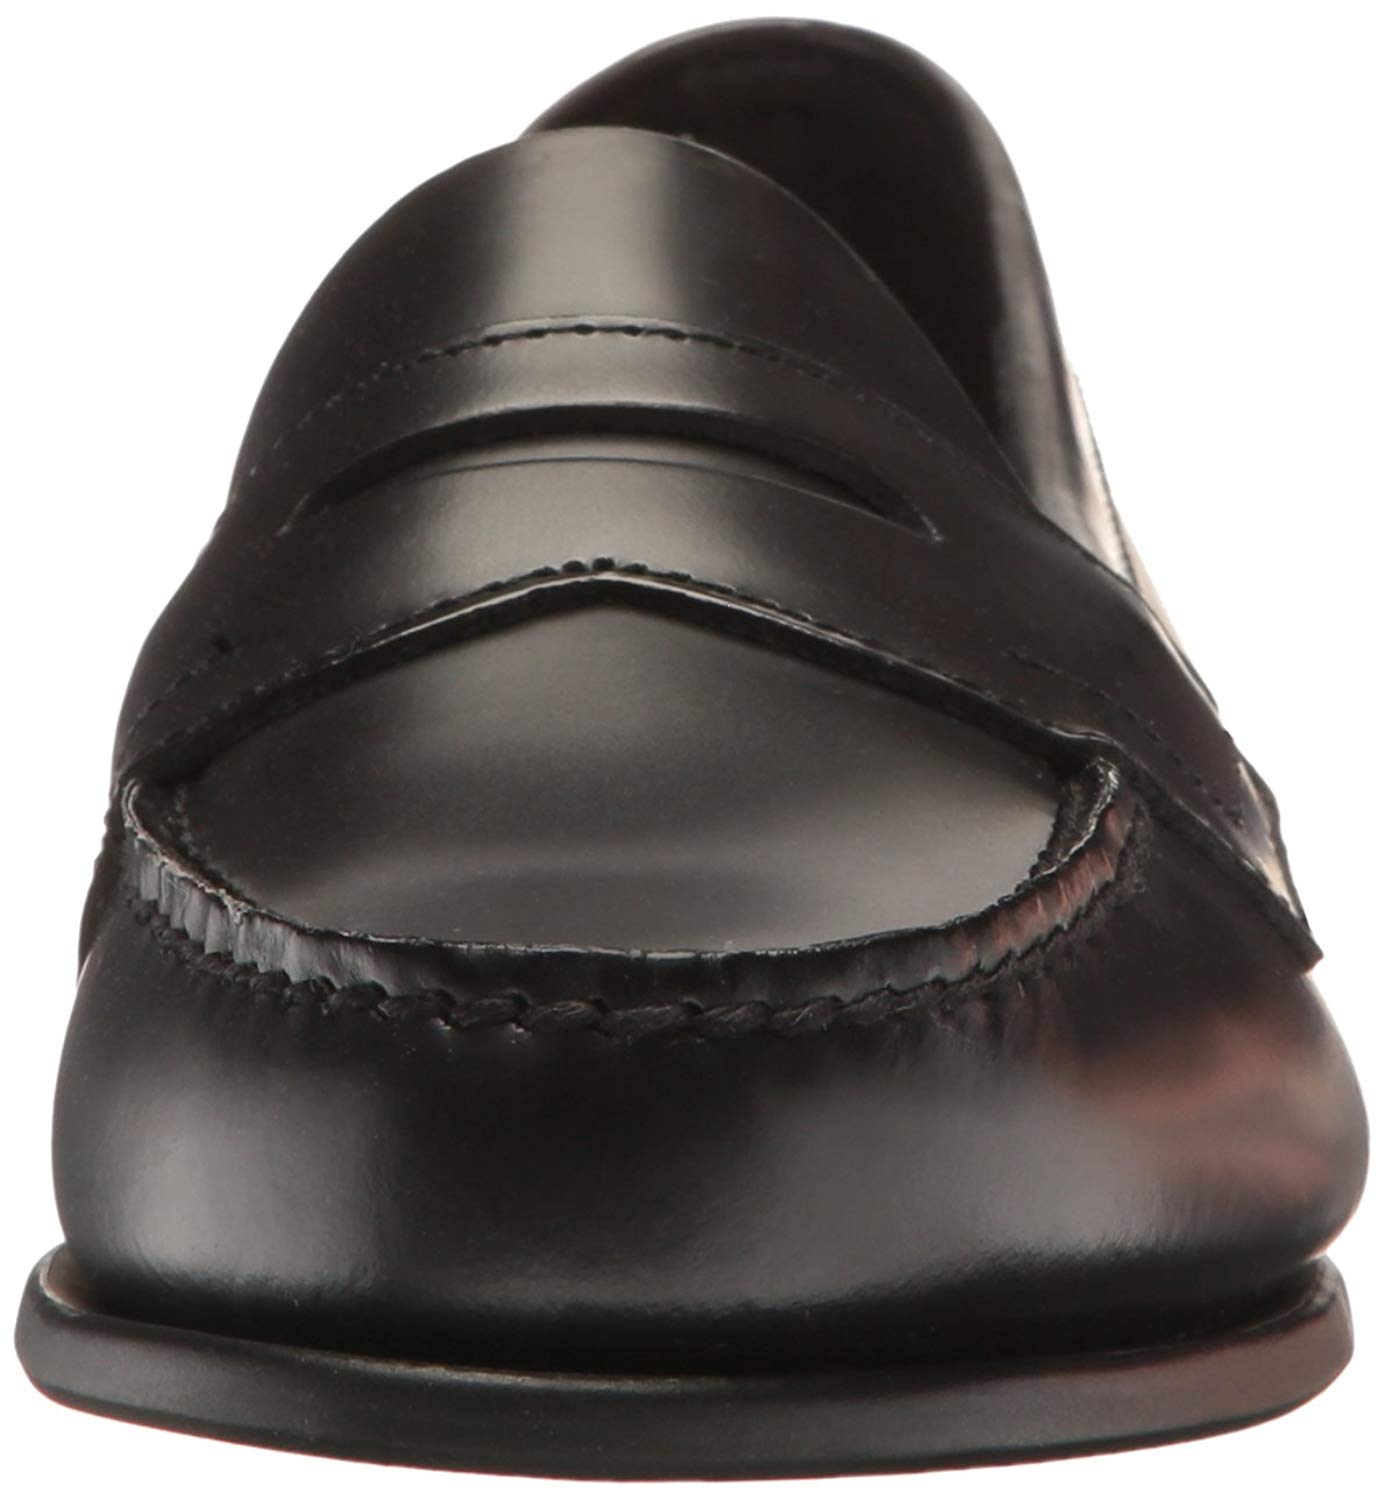 Eastland Womens classic ll Leather Closed Toe Loafers, Black, Size 8.5 ...